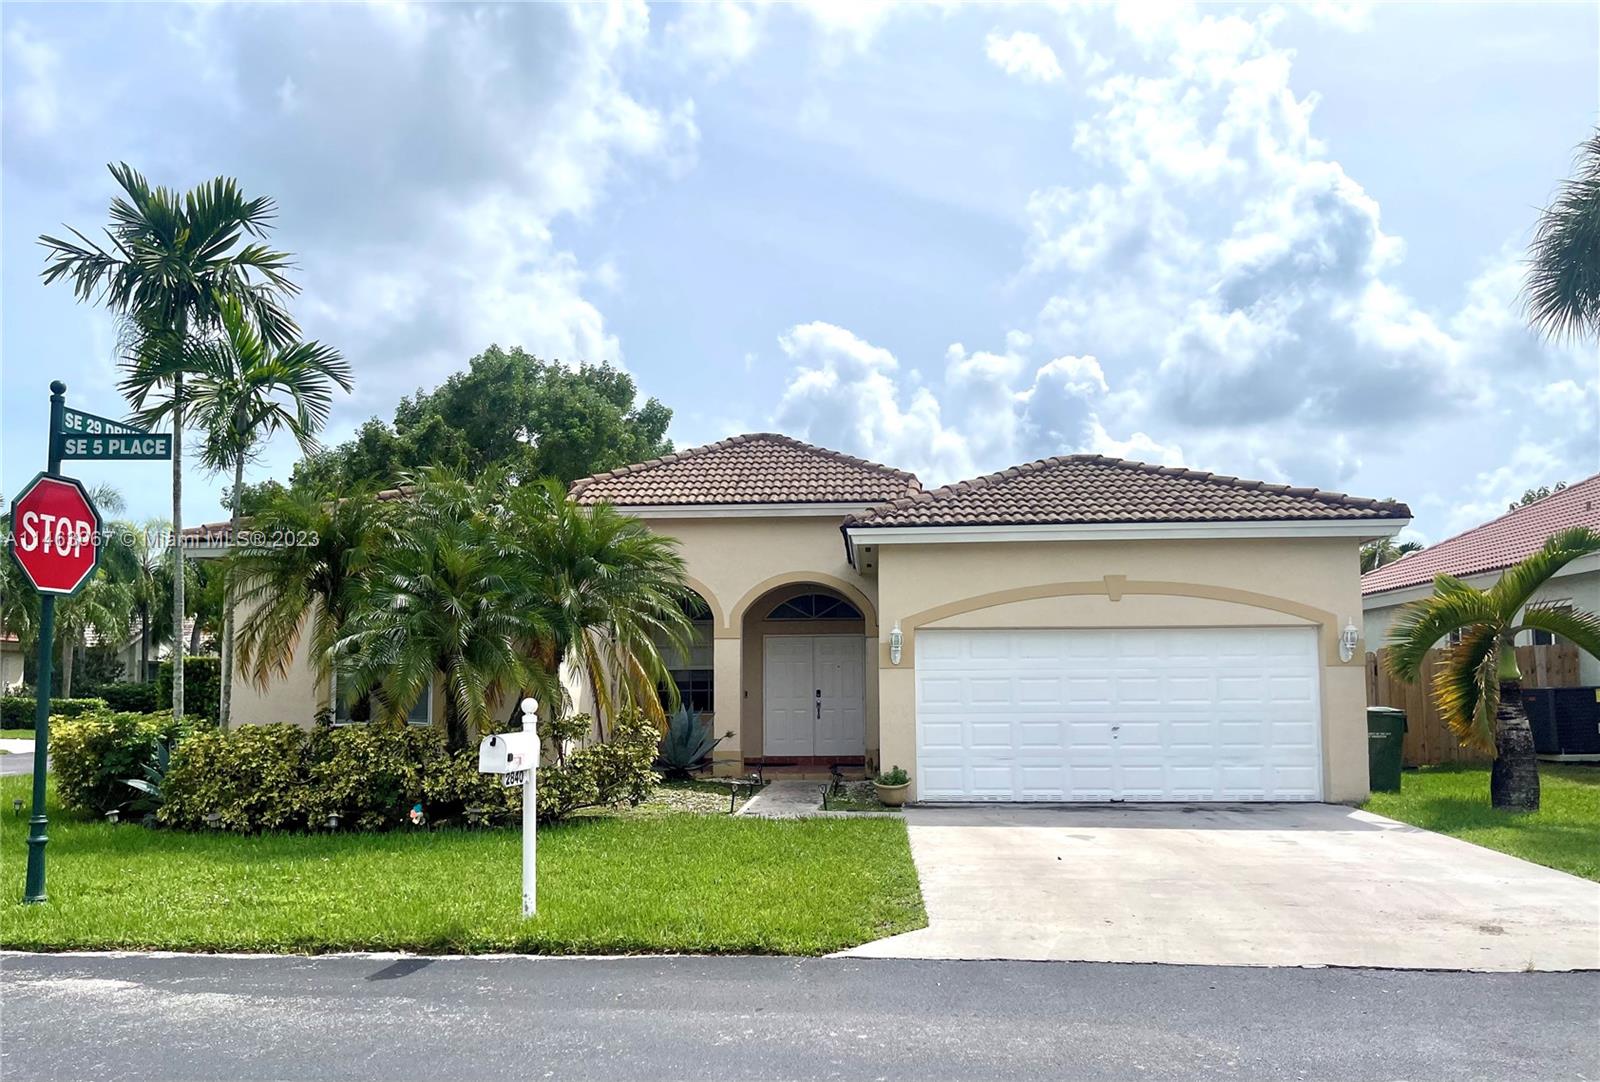 This 4/3 single-family home is inside the gated community of Keys Gate located near the turnpike with shopping centers and dining nearby.